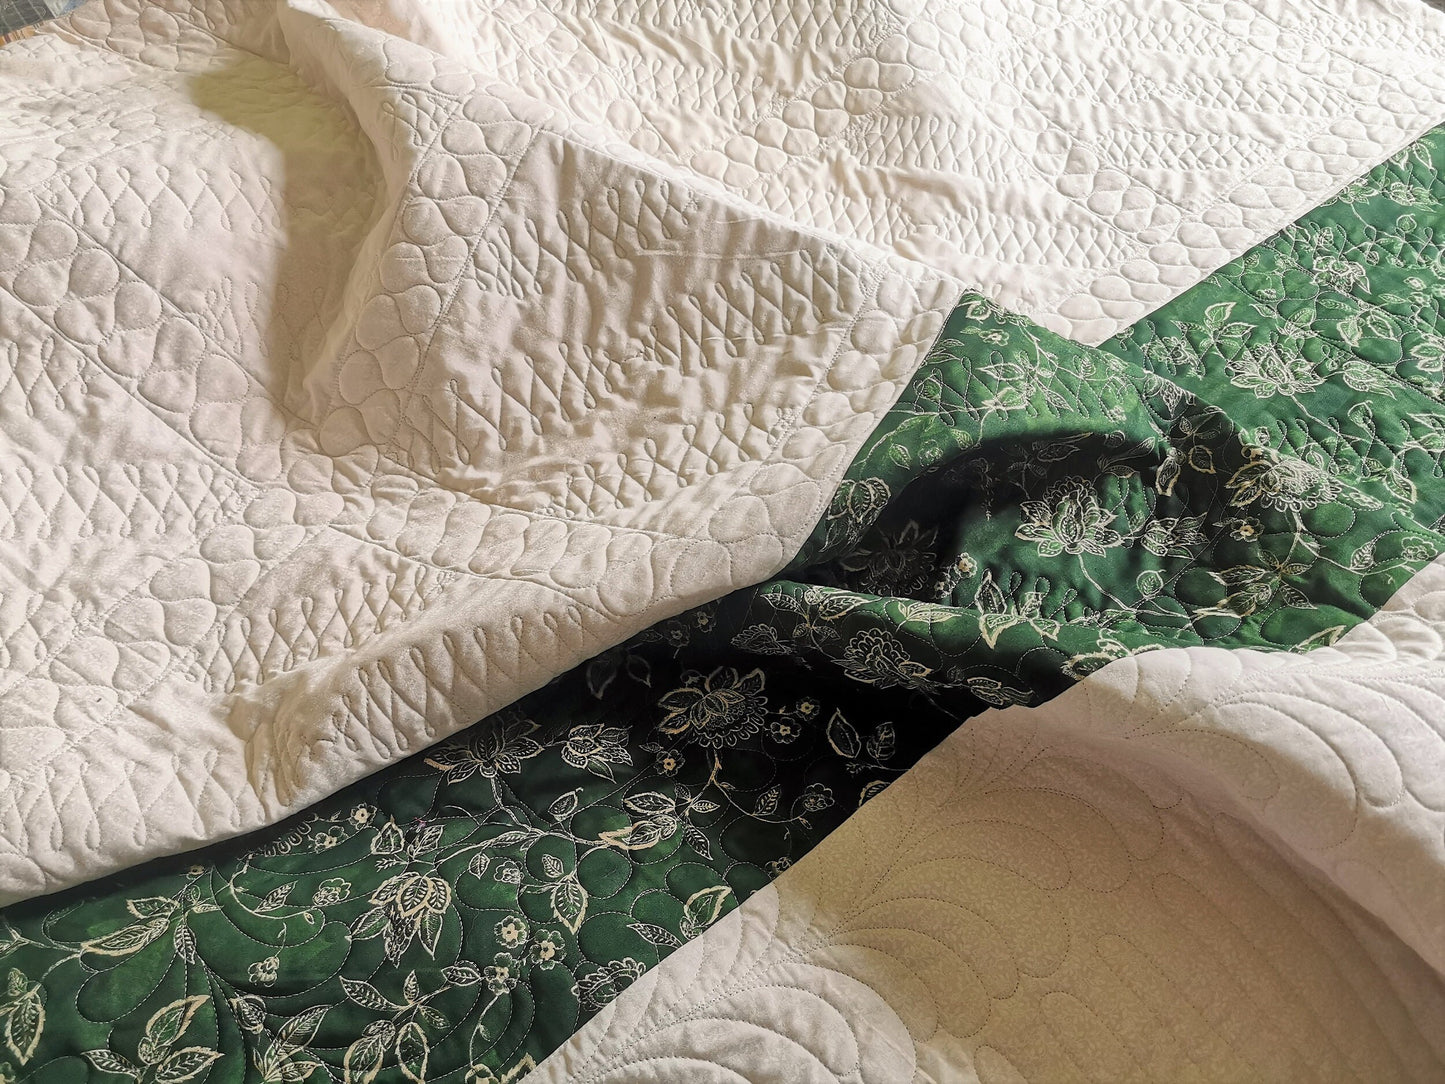 custom quilting shows well on the back of the queen bed quilt